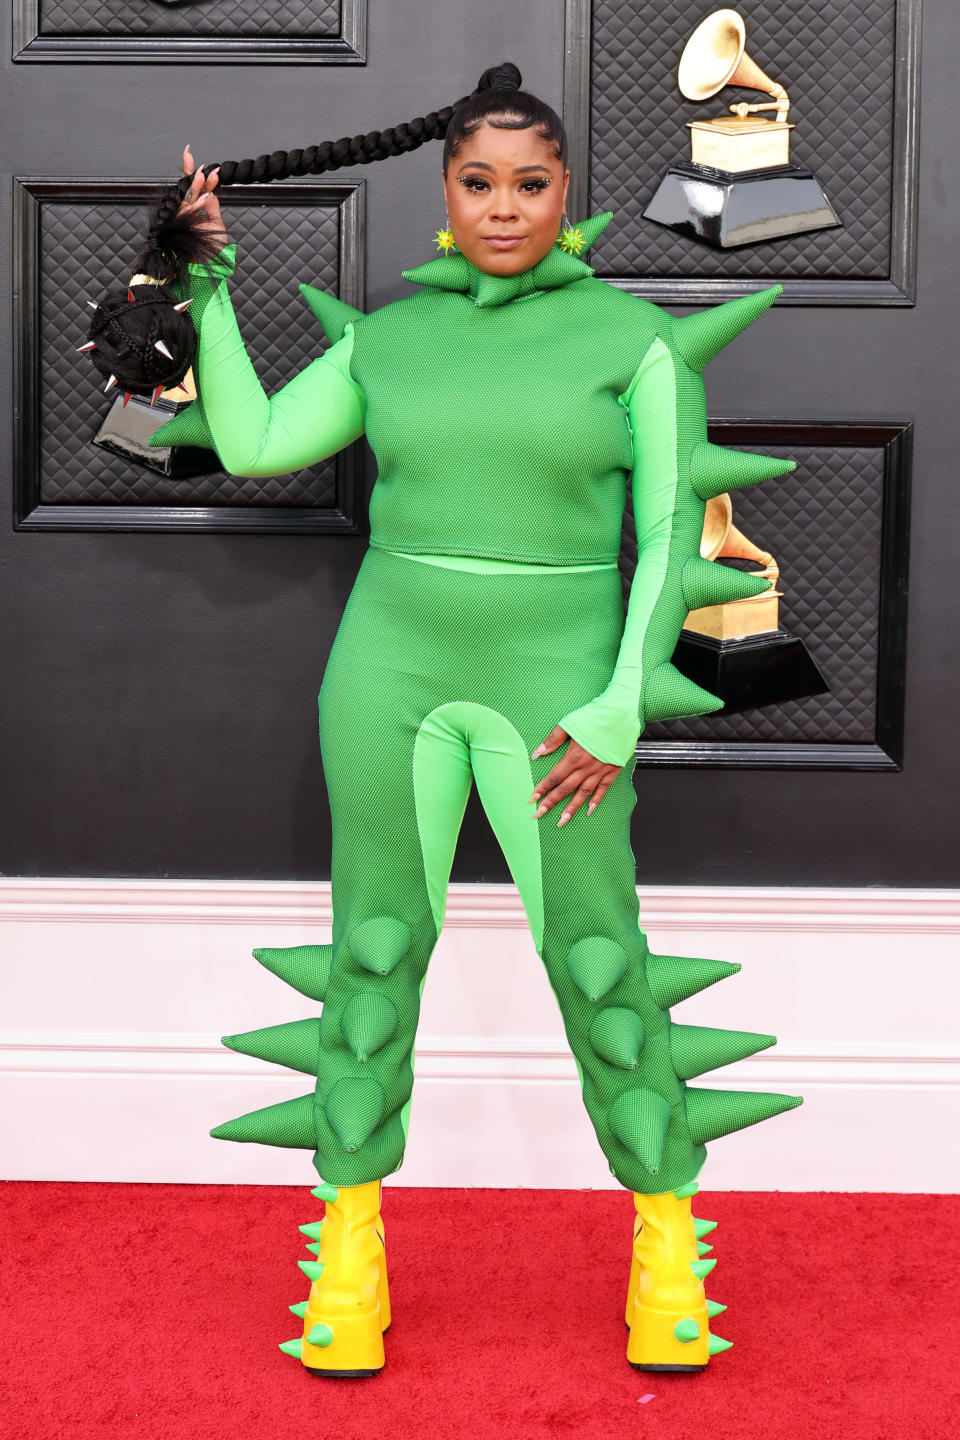 Tayla holding her long braid and wearing a dinosaur-esque outfit on the red carpet